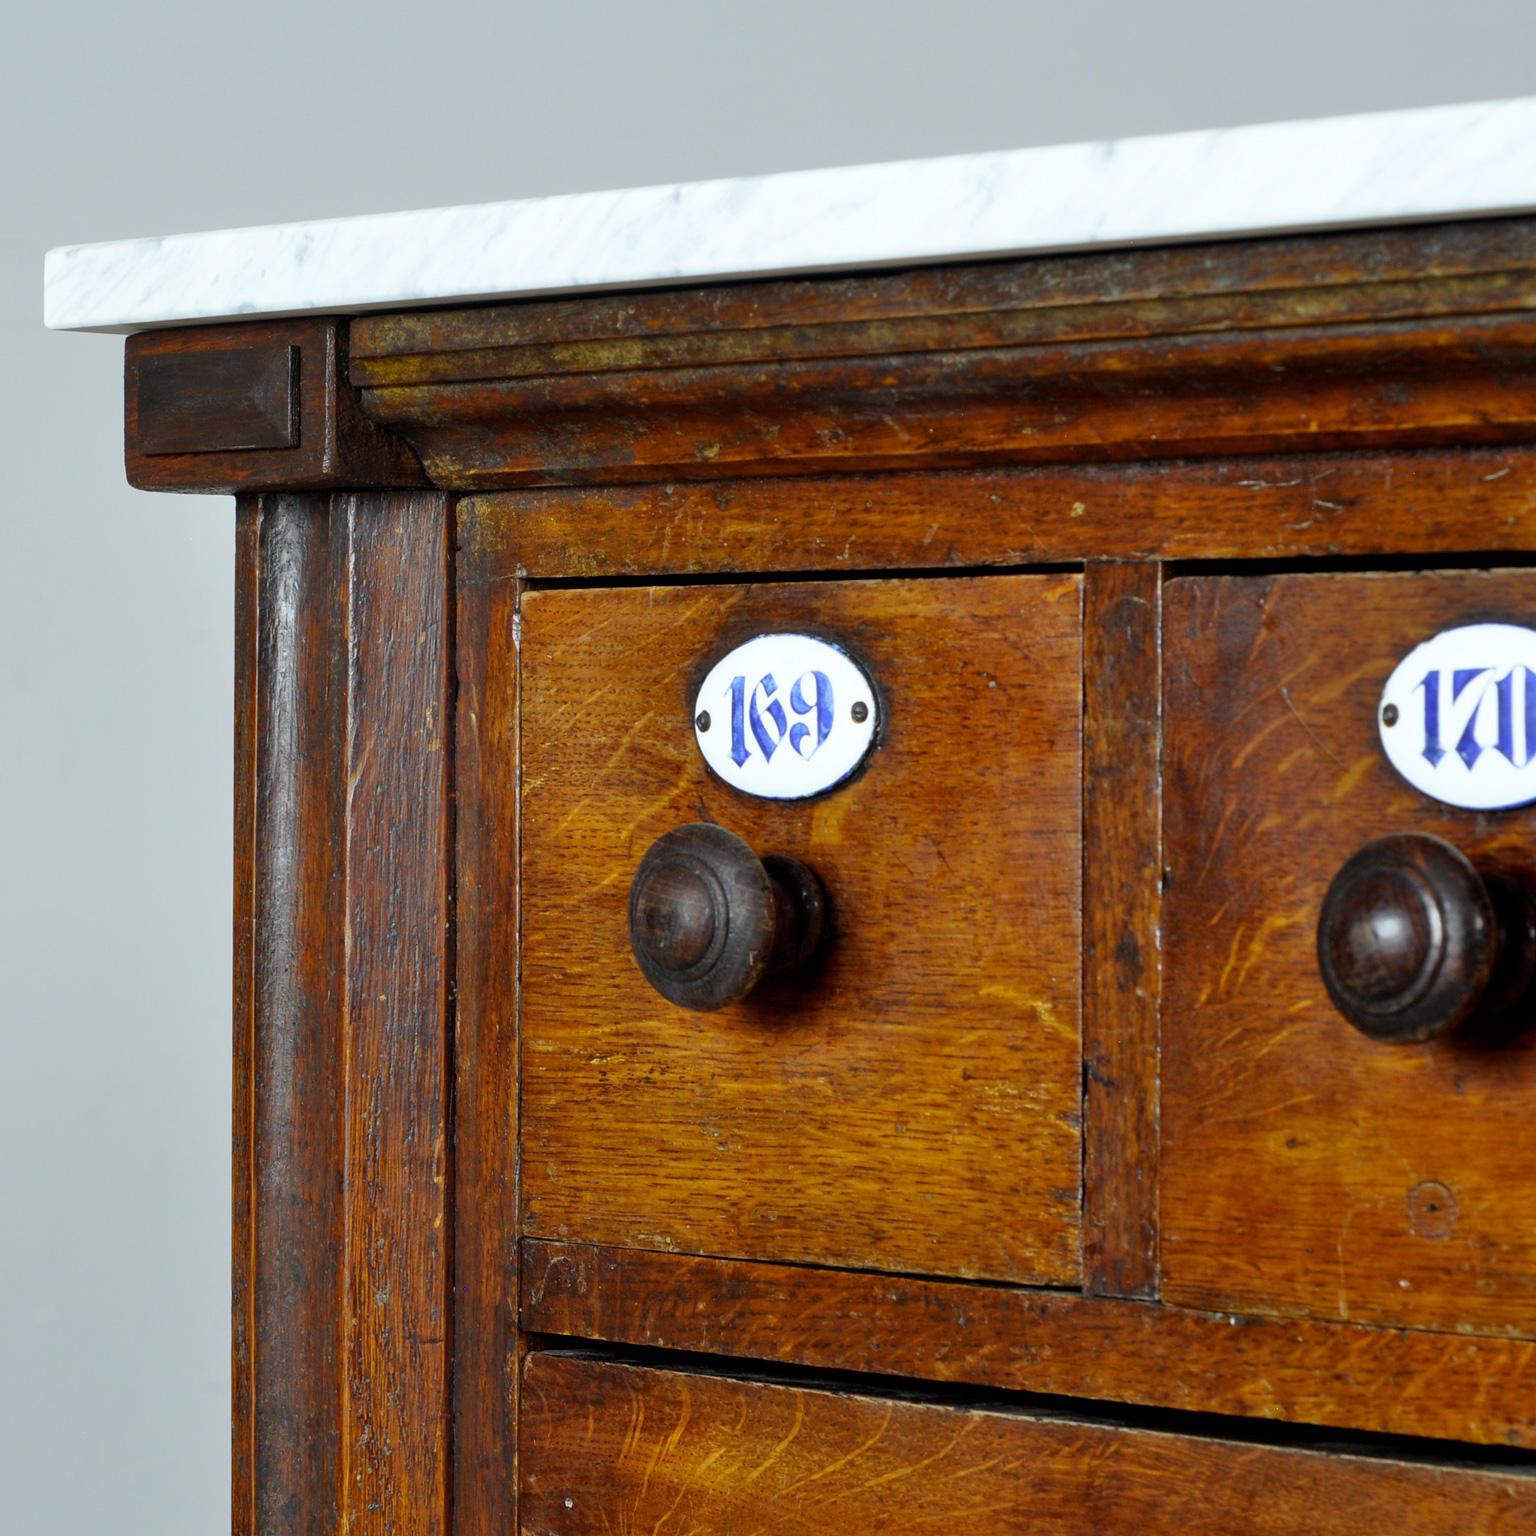 Apothecary Chest of Drawers with Marble Top, 1930s 2